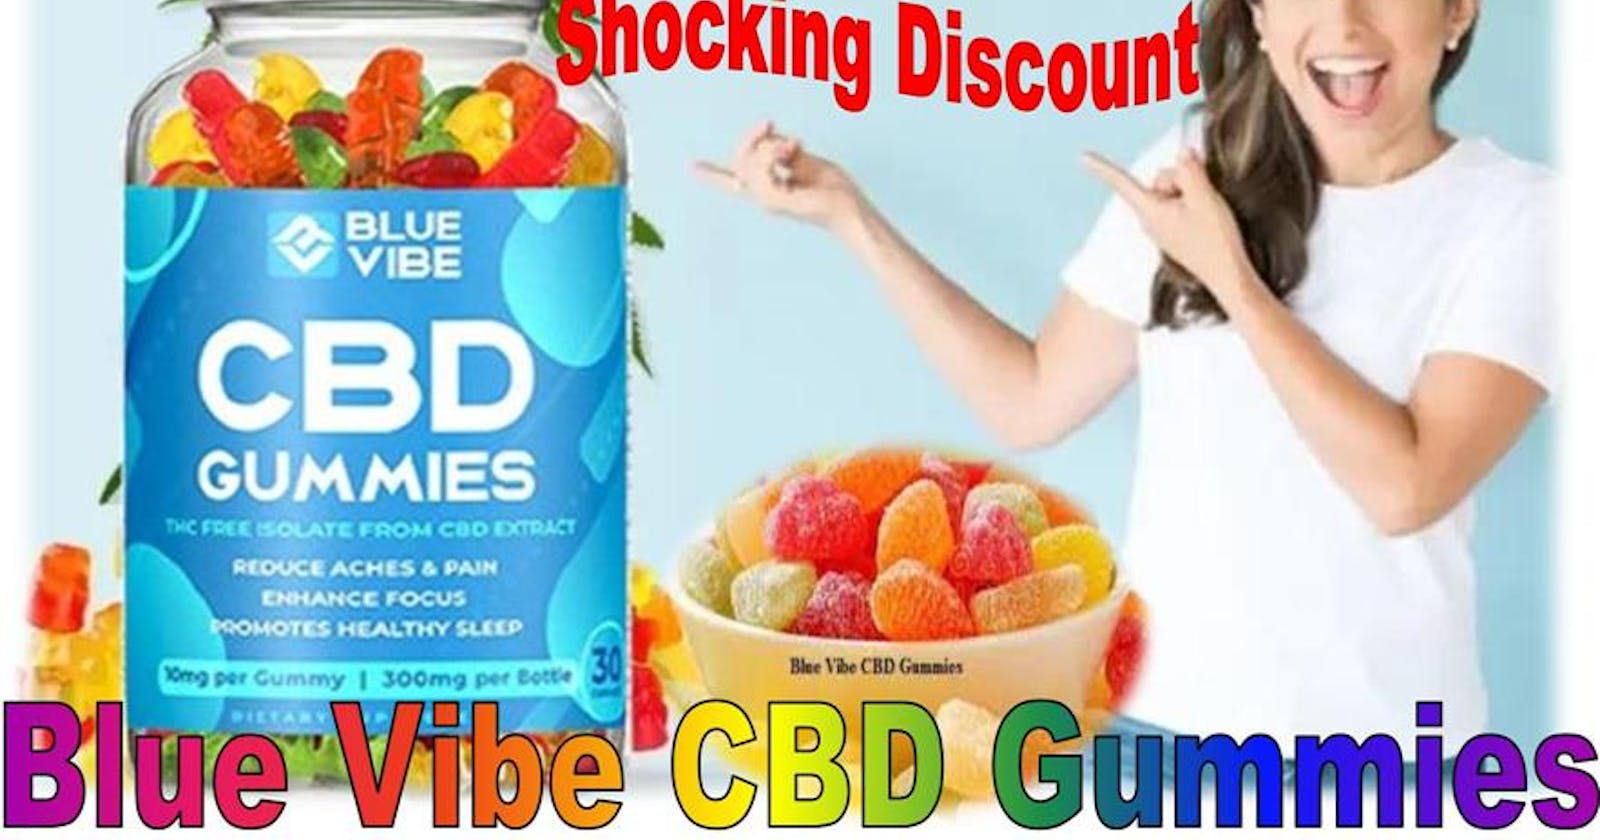 Chill Out with Blue Vibe CBD Gummies?